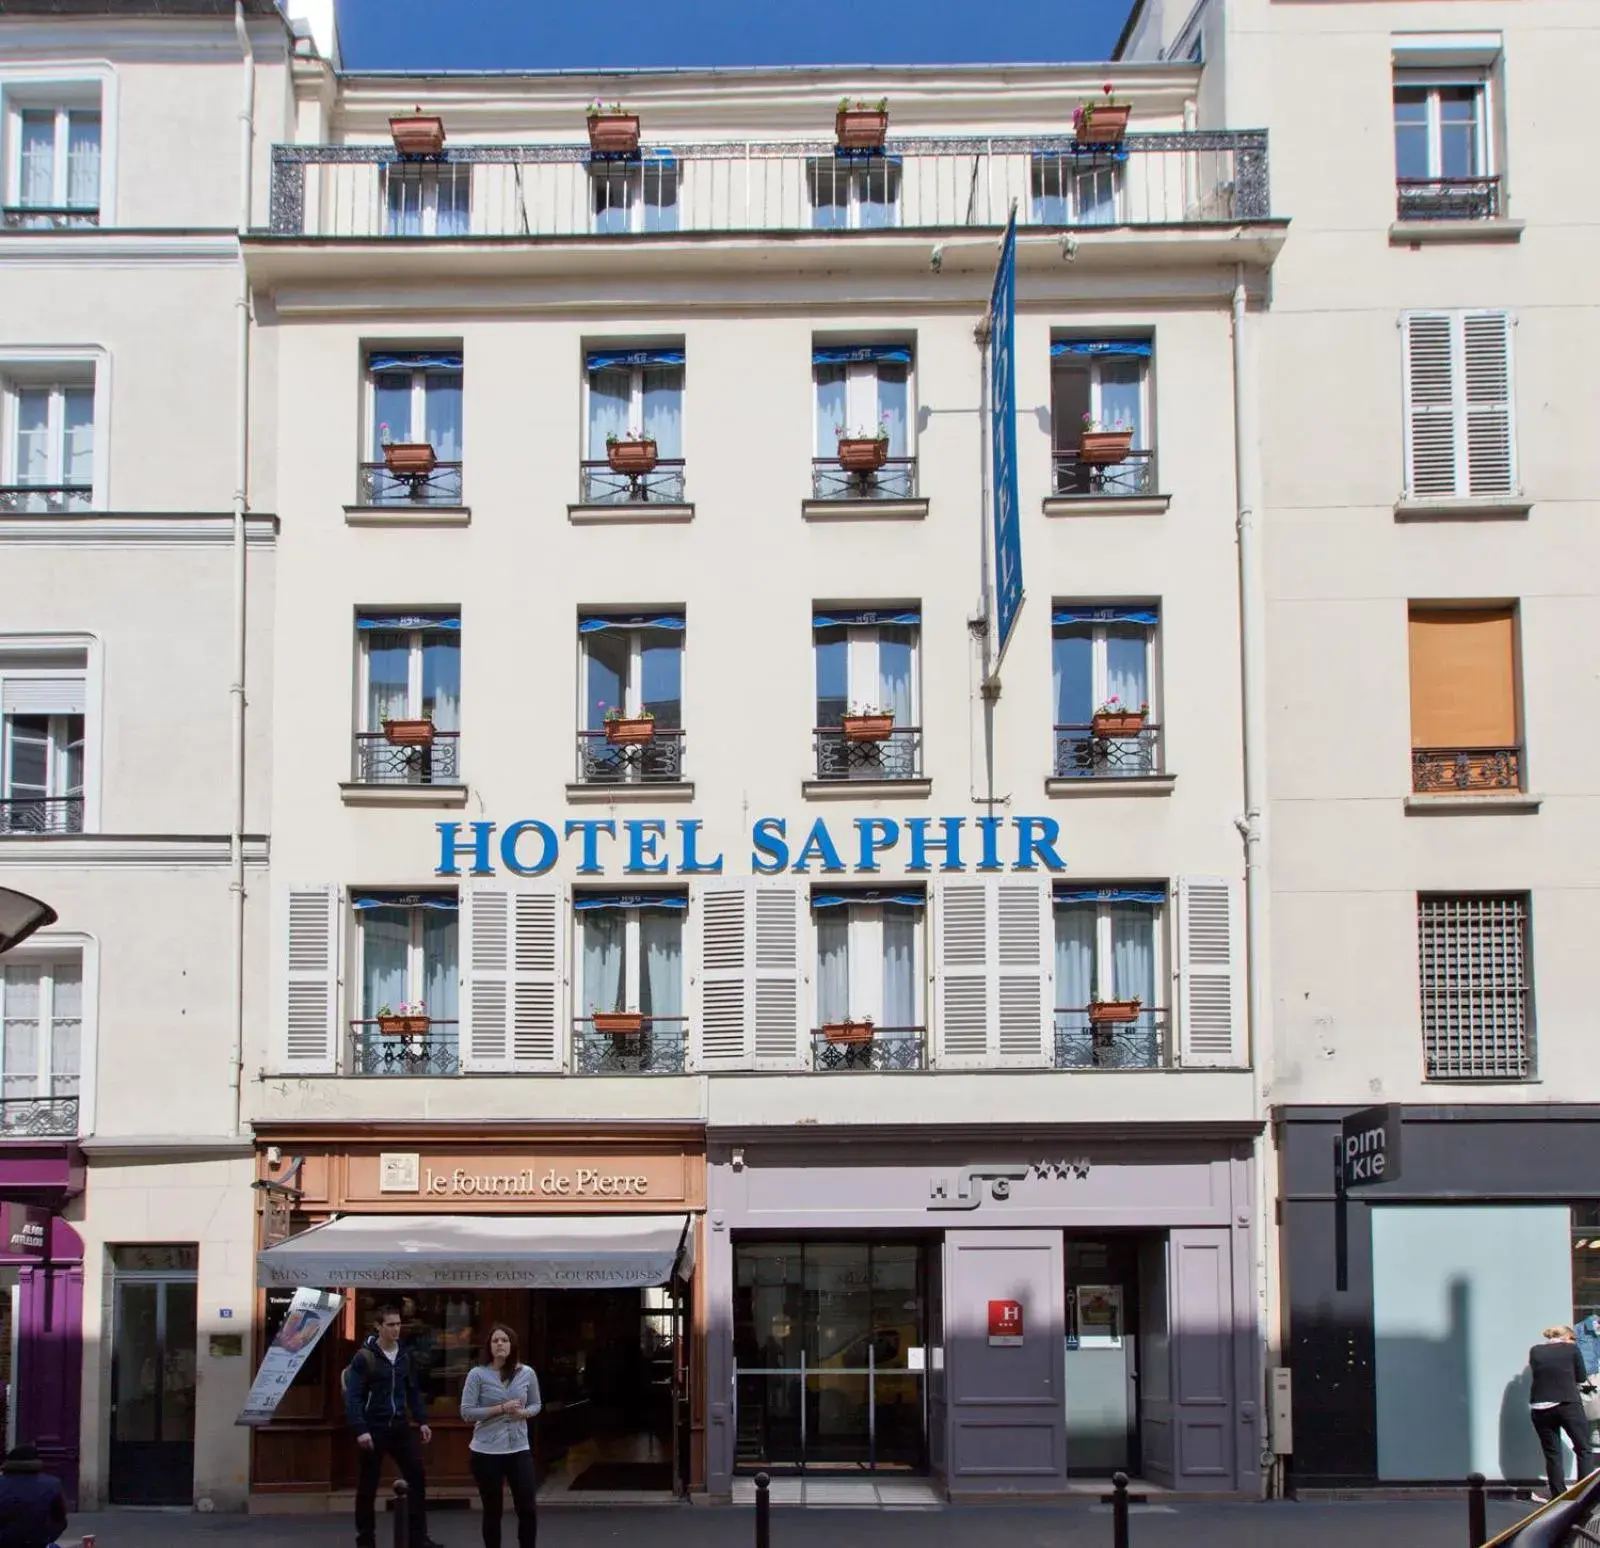 Property Building in Saphir Grenelle